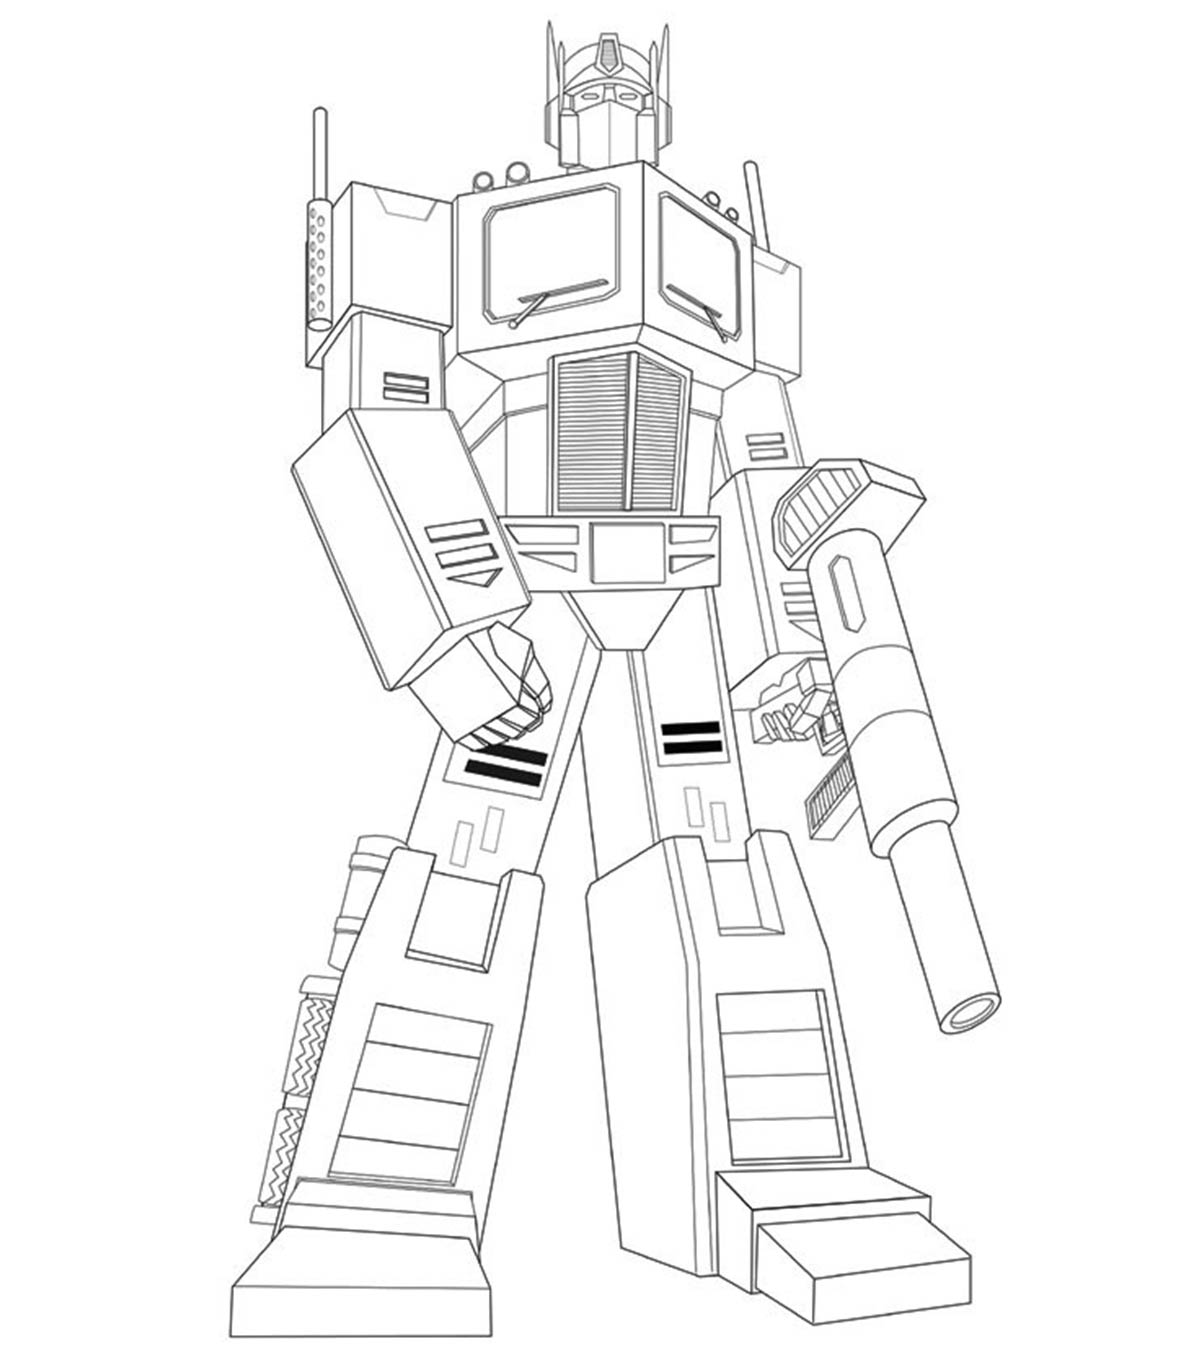 20 Popular Transformers Coloring Pages Your Toddler Will Love_image